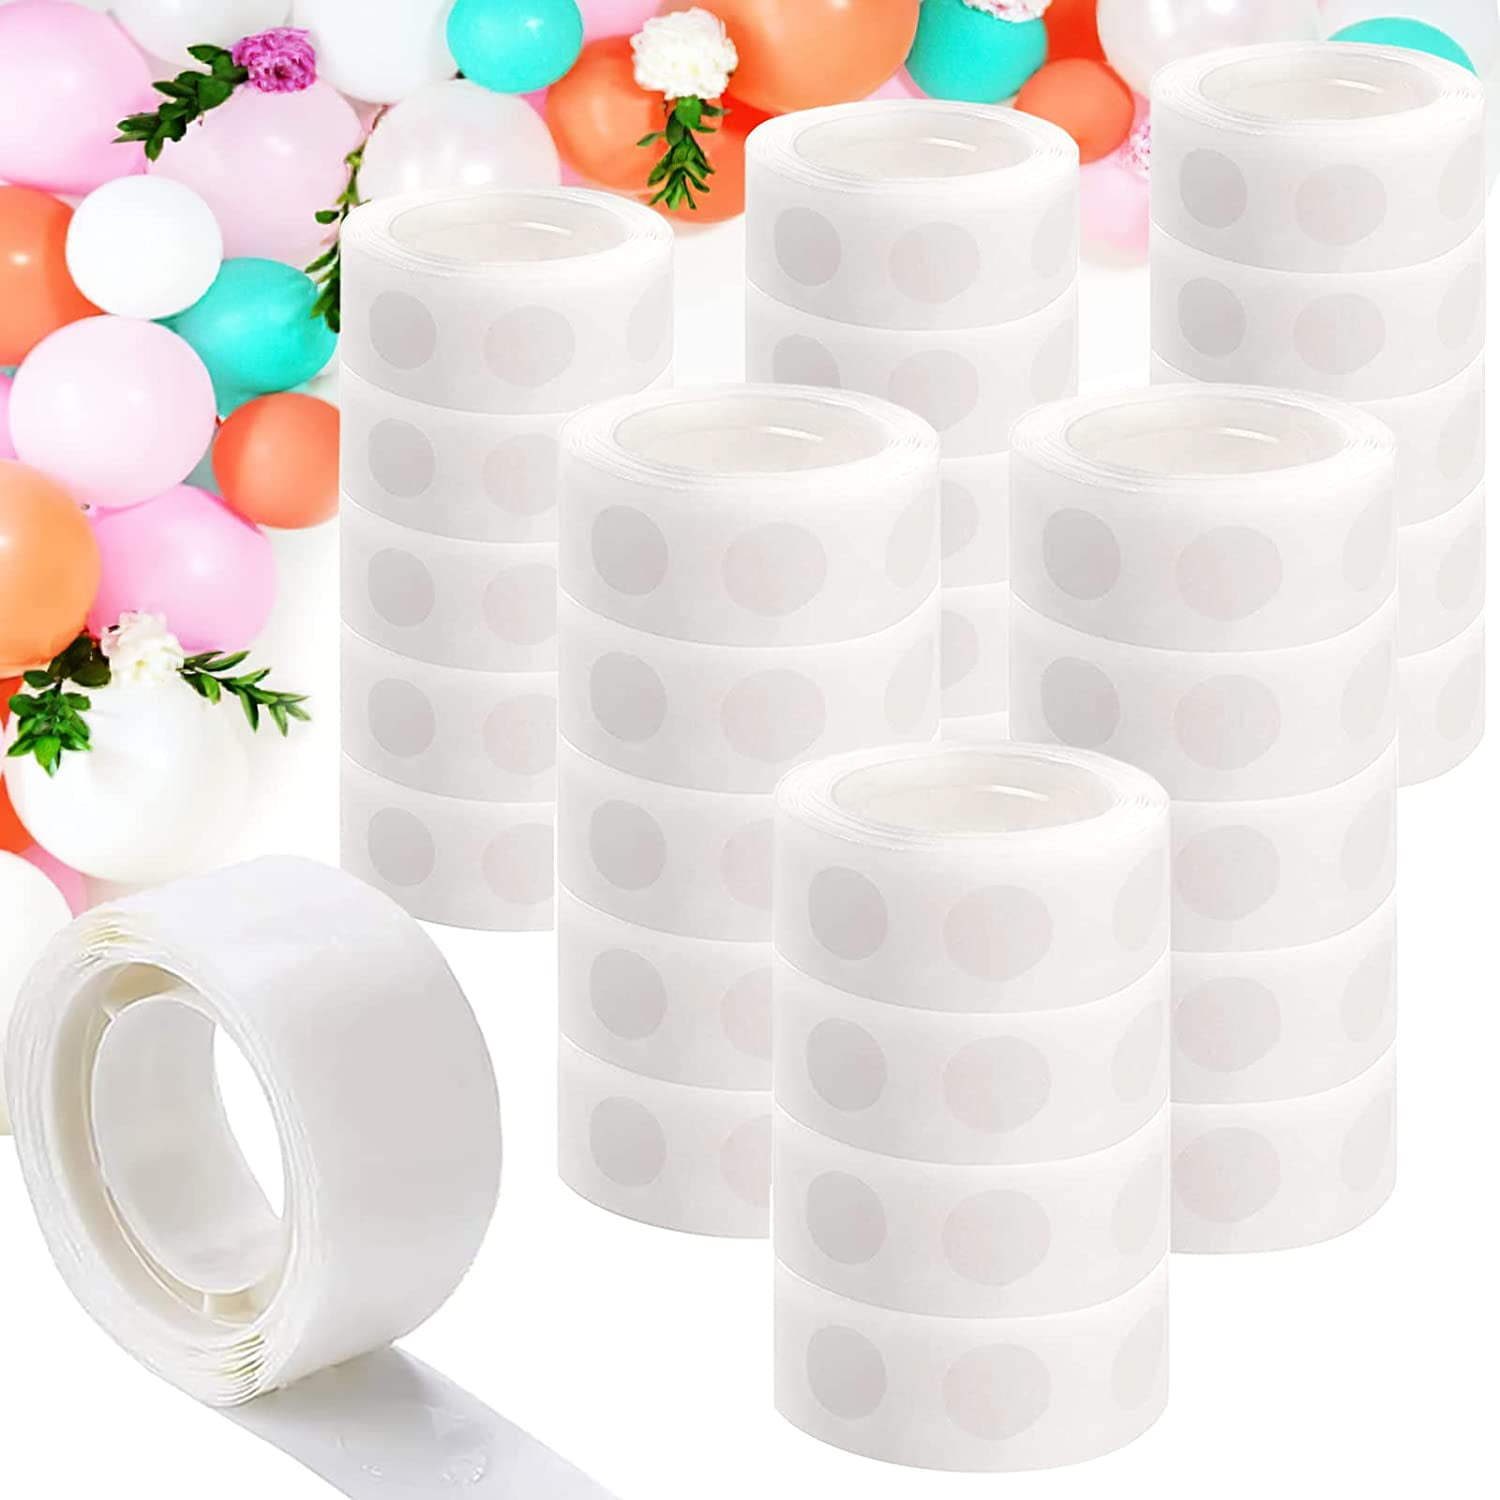  WISYOK 4000Pcs Glue Dots for Balloon, Point Dots, Removable  Adhesive Point Tape, Double Sided Dots Stickers for Craft & Wedding  Decoration : Arts, Crafts & Sewing